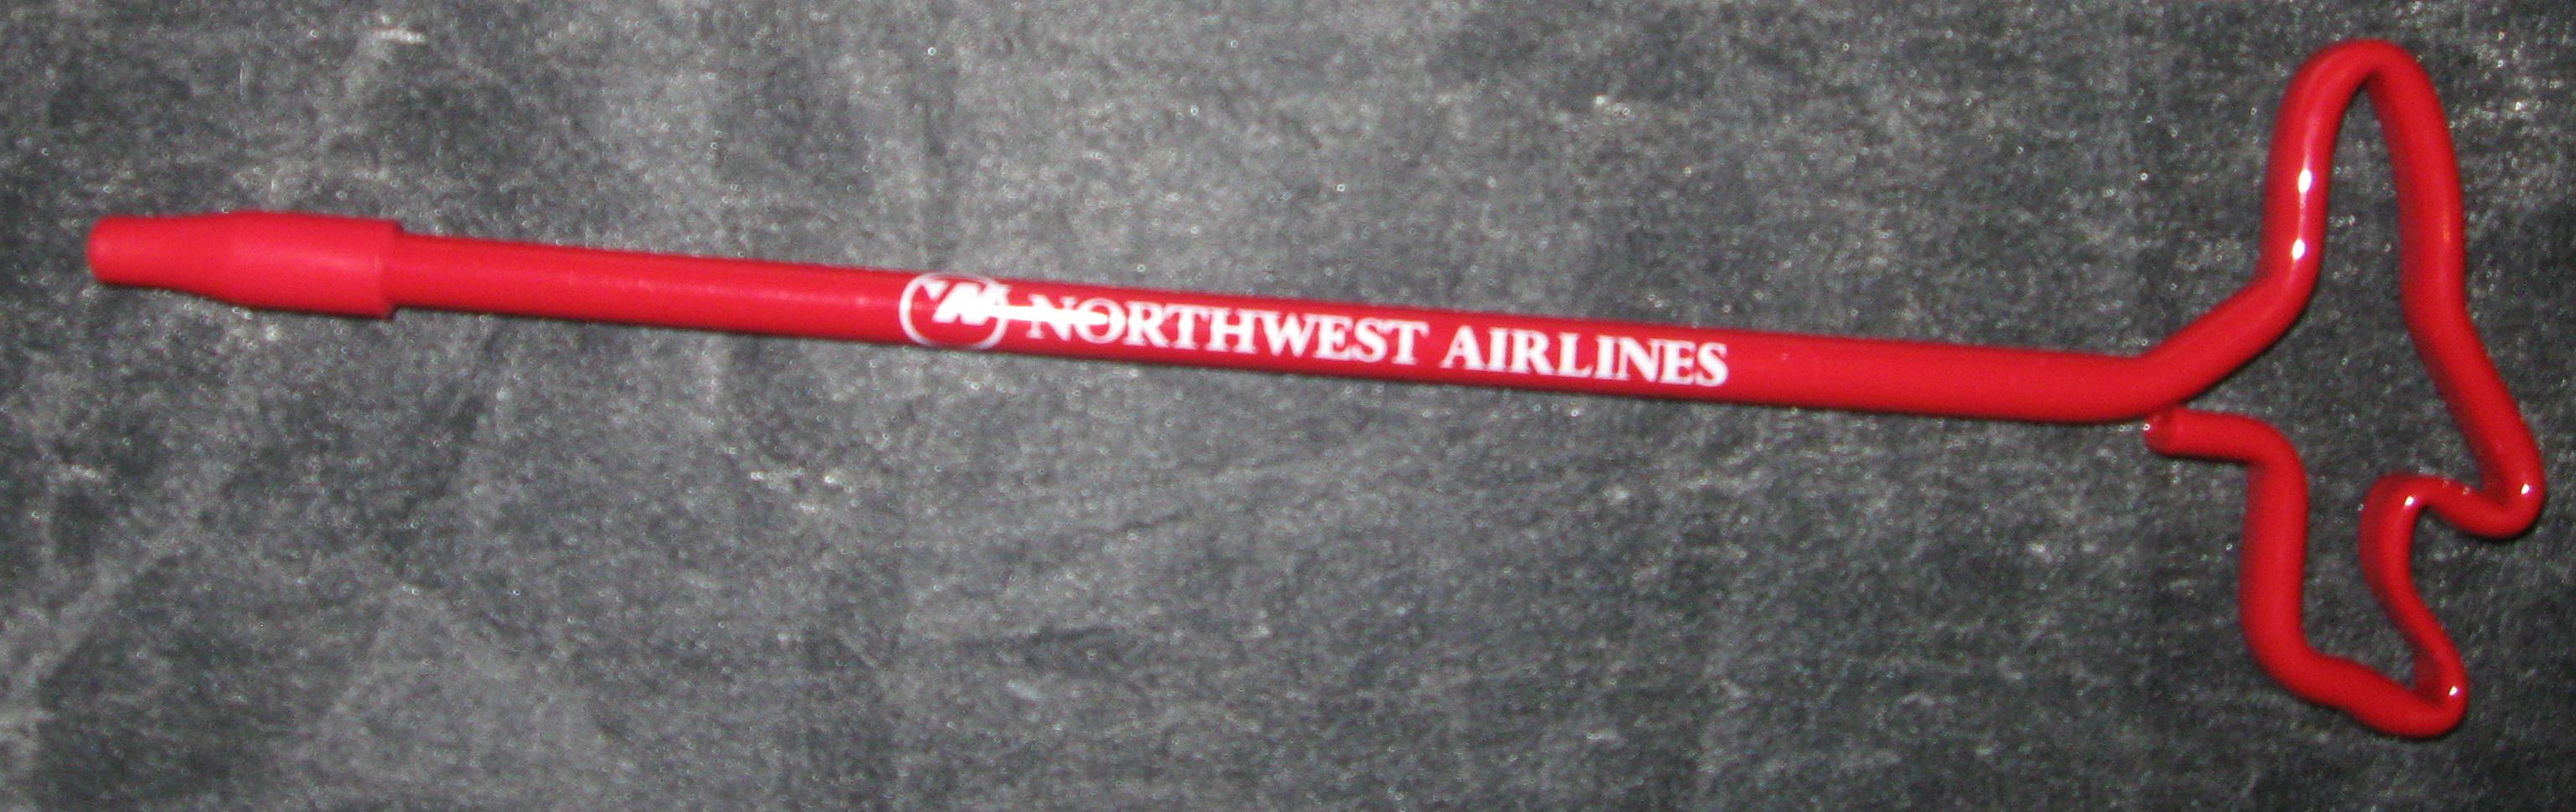 Northwest Airlines pen in the shape of a plane